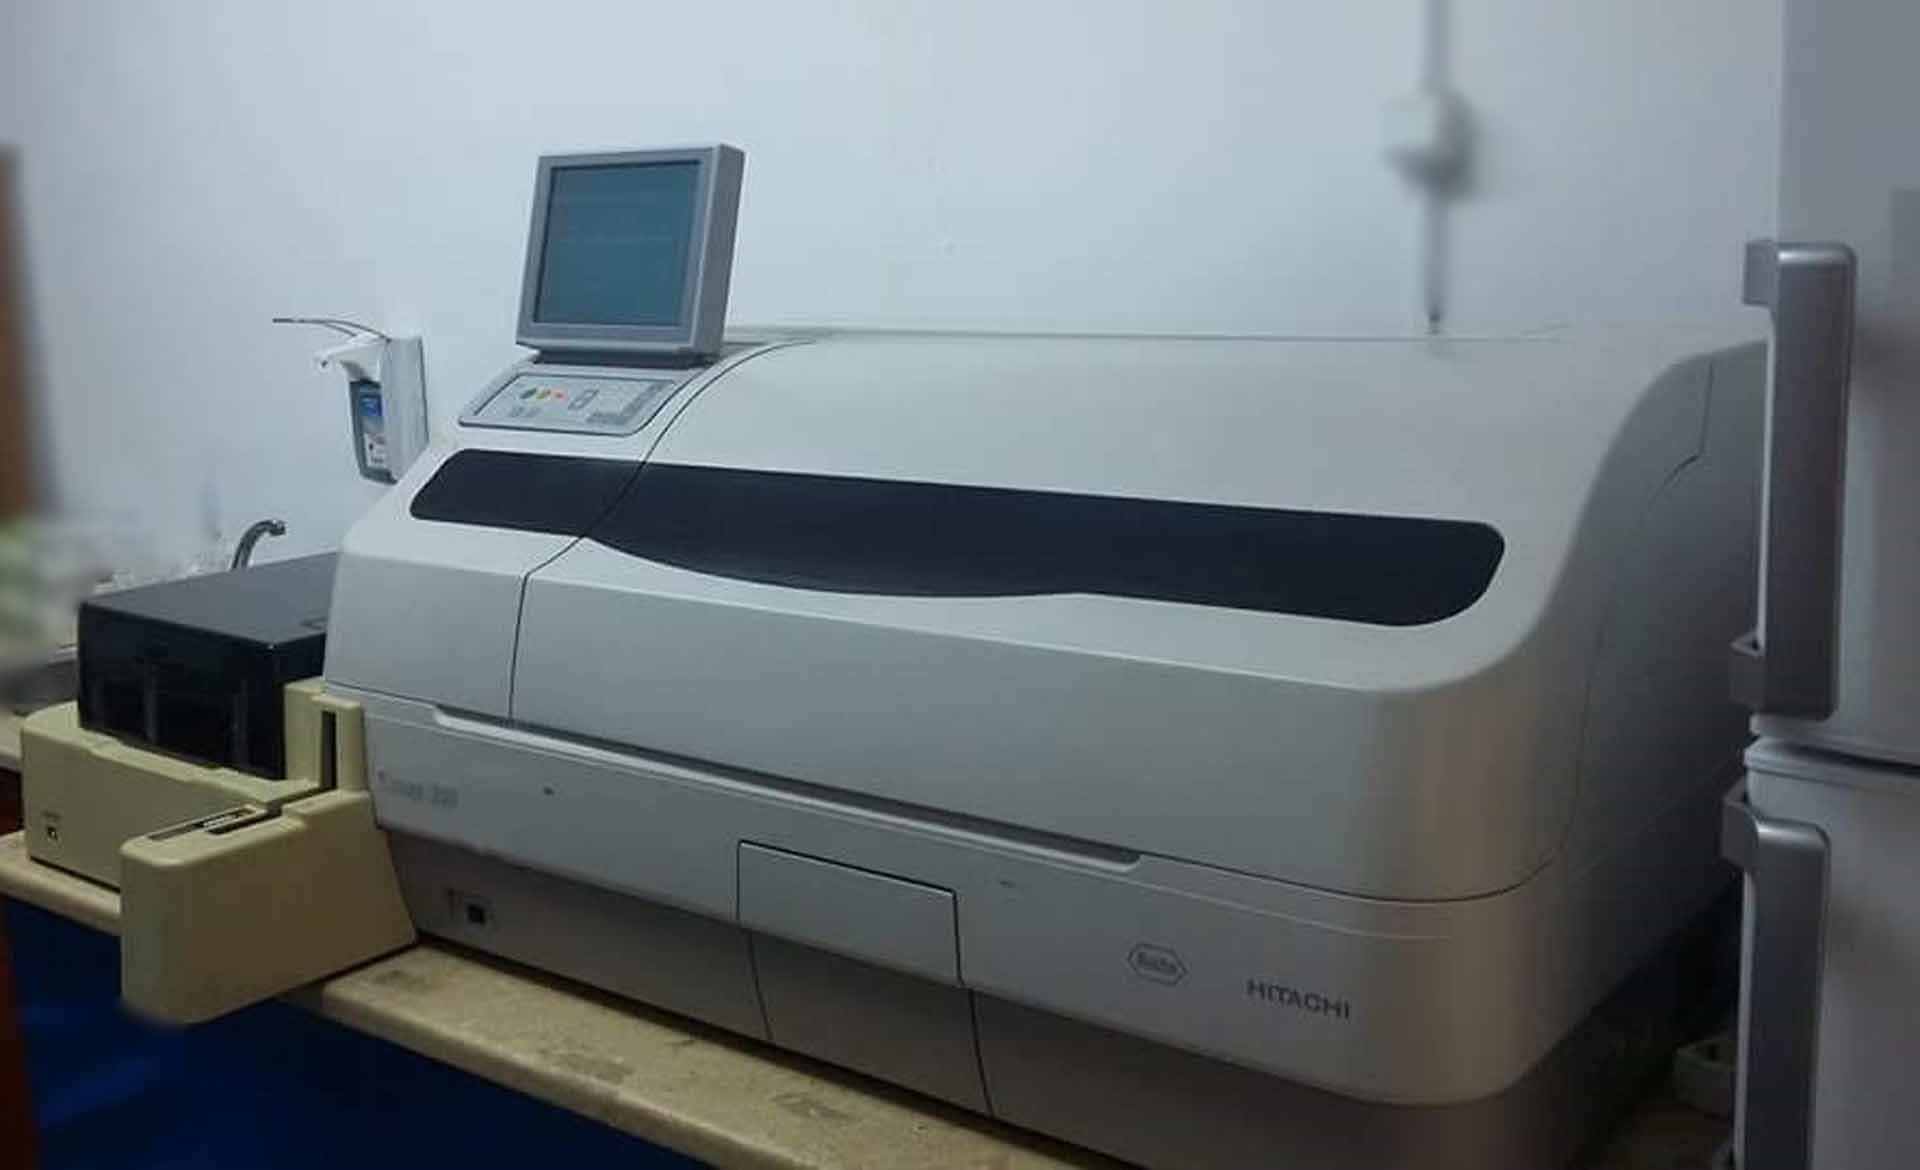 Photo Used ROCHE Elecsys 2010 For Sale